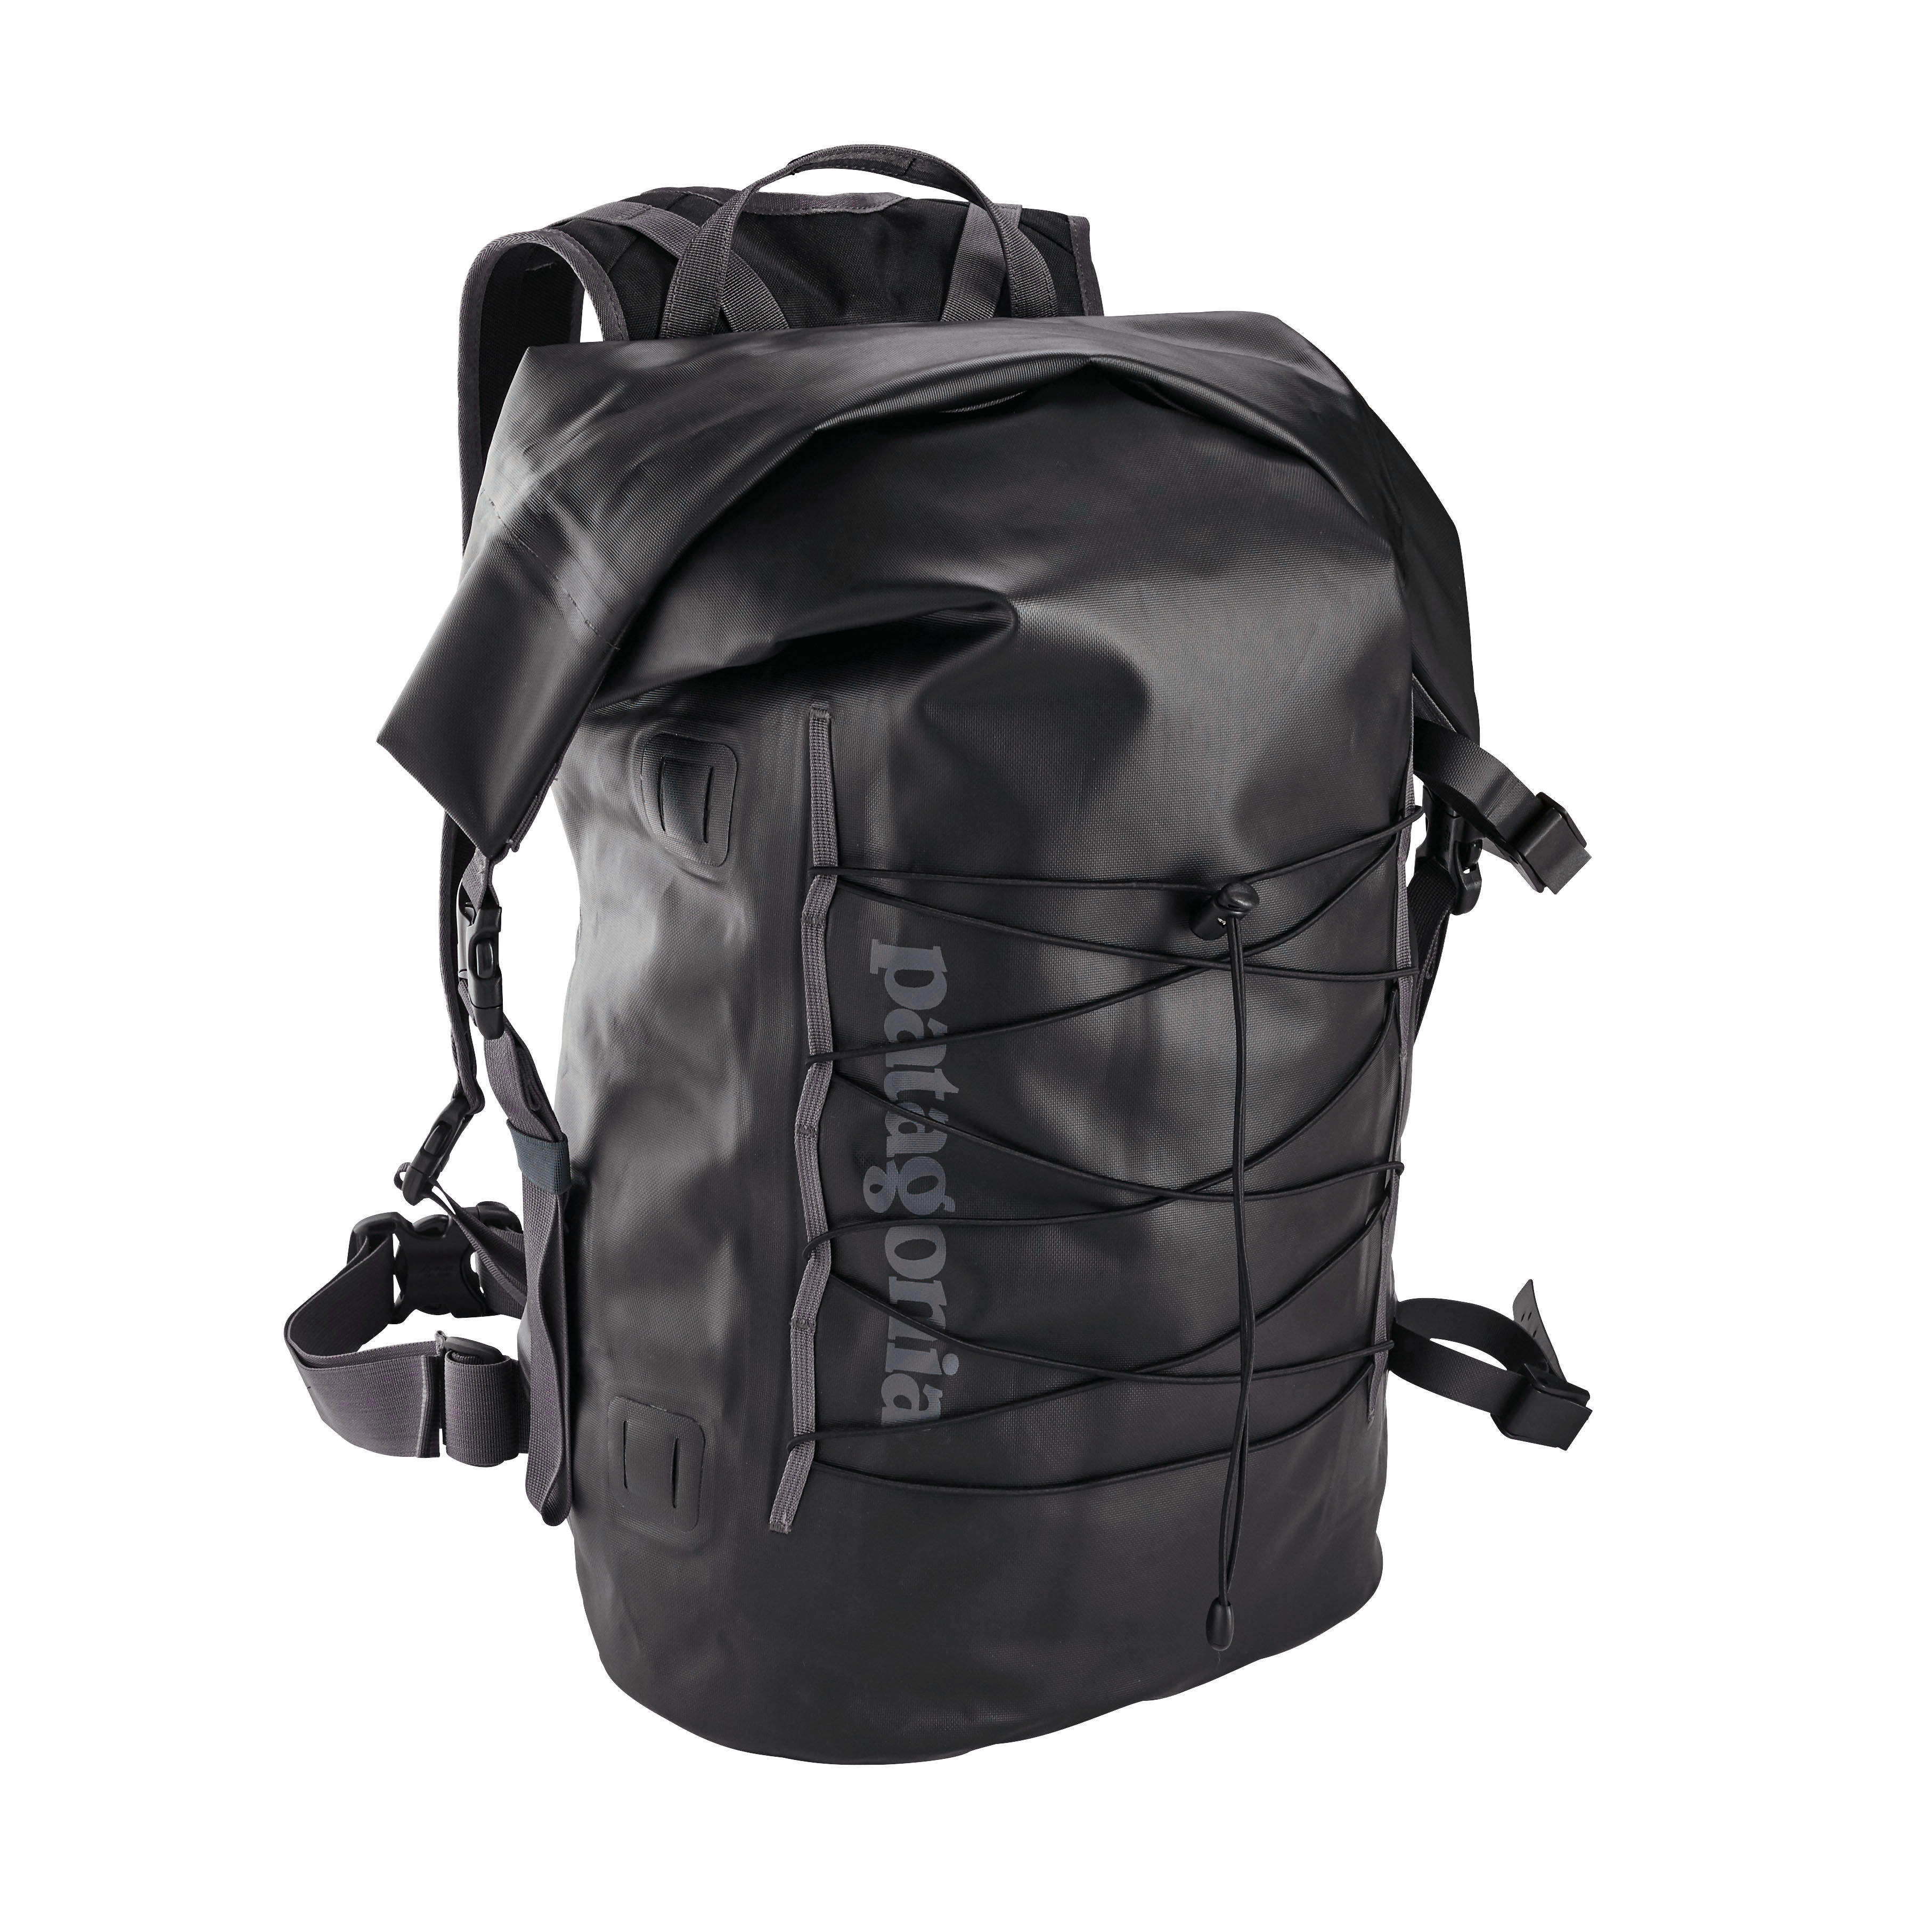 Patagonia Stormfront Roll Top Pack 45 L - Sac à dos imperméable | Hardloop